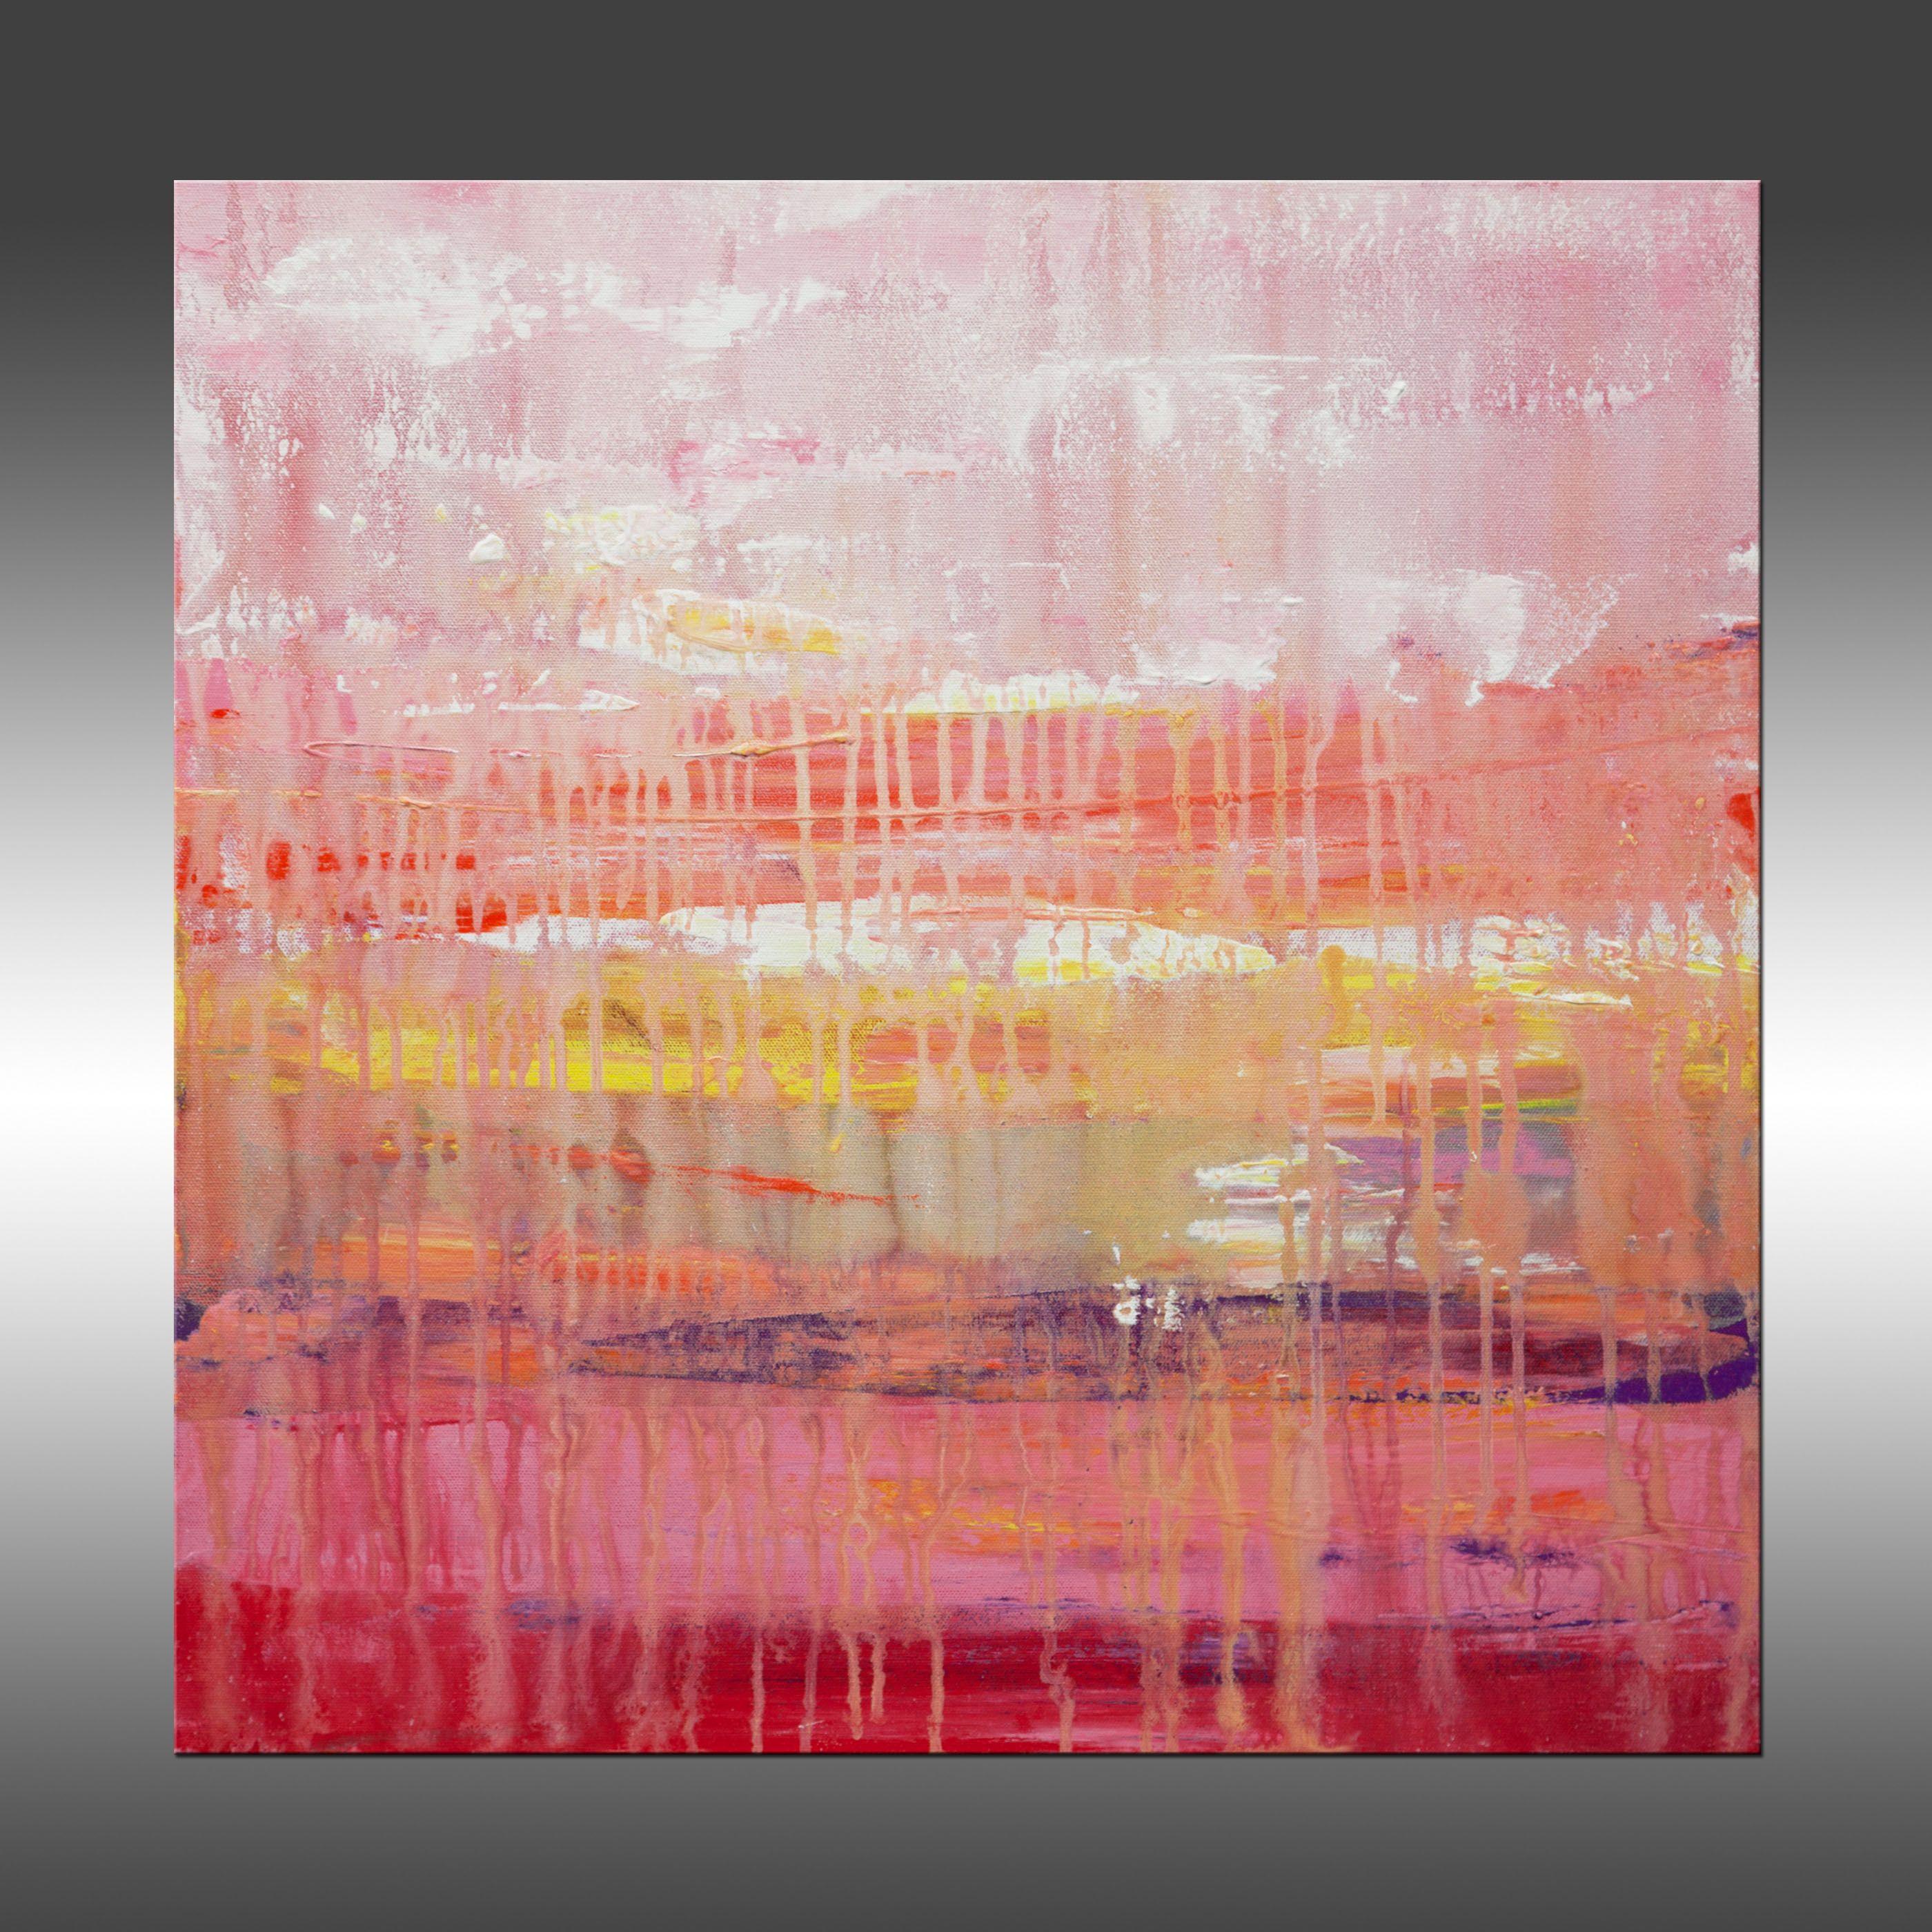 Asthenosphere 3 is an original painting, created with acrylic paint on gallery-wrapped canvas. It has a width of 24 inches and a height of 24 inches with a depth of 1.5 inches (24x24x1.5).    The colors used in the painting are white, pink, orange,